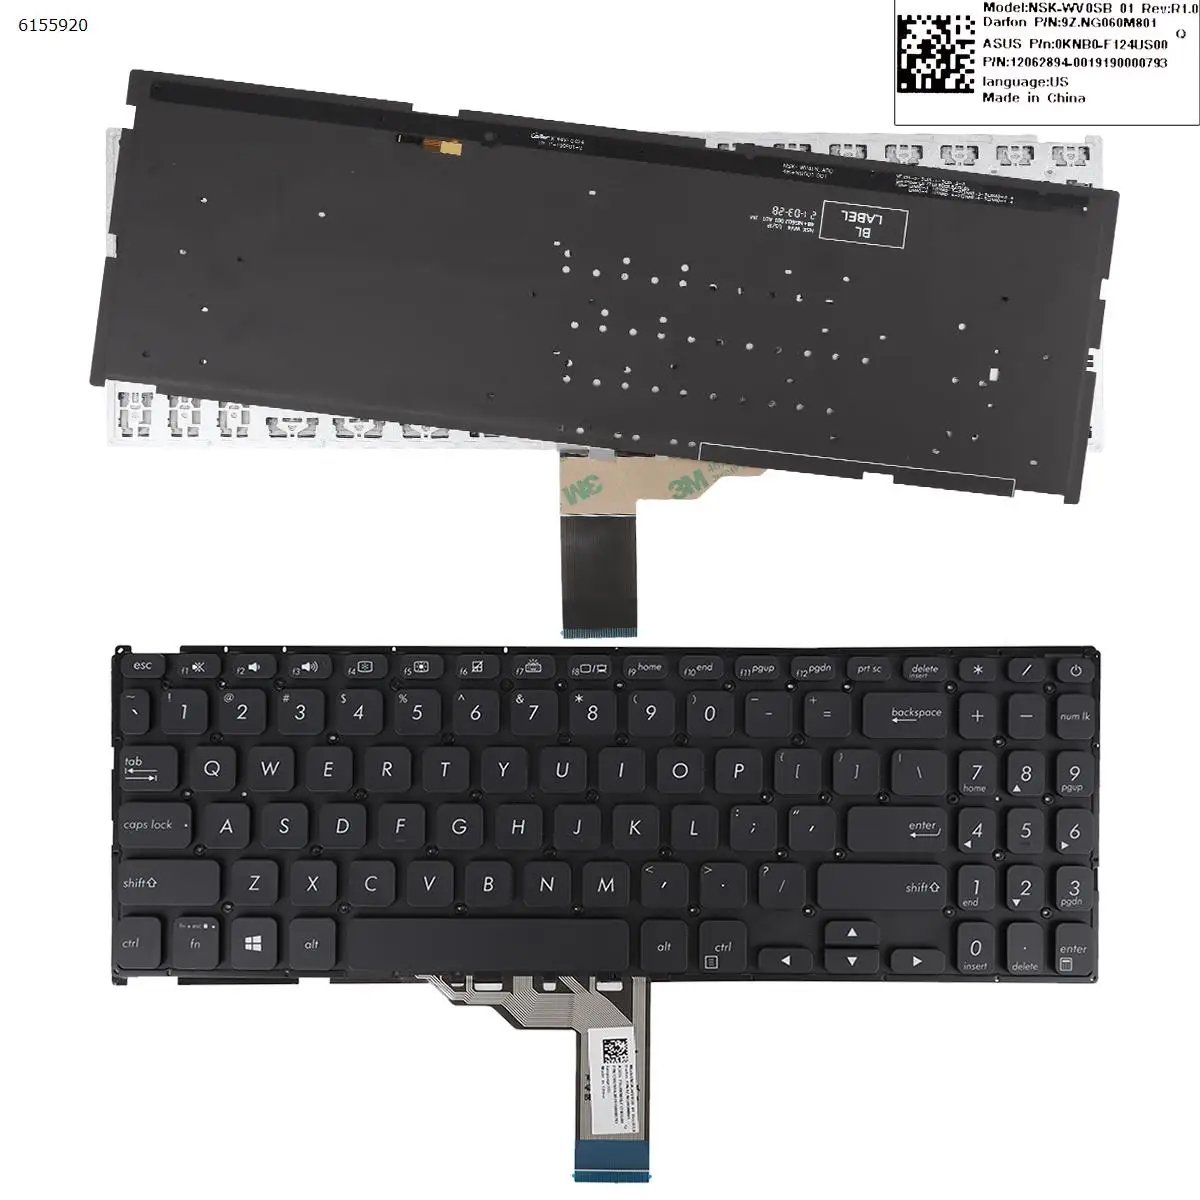 

US Laptop Keyboard for ASUS Vivobook X512 X512FA X512DA X512UA X512UB X512FB X512FL F512DA F512FA BLACK Backlit